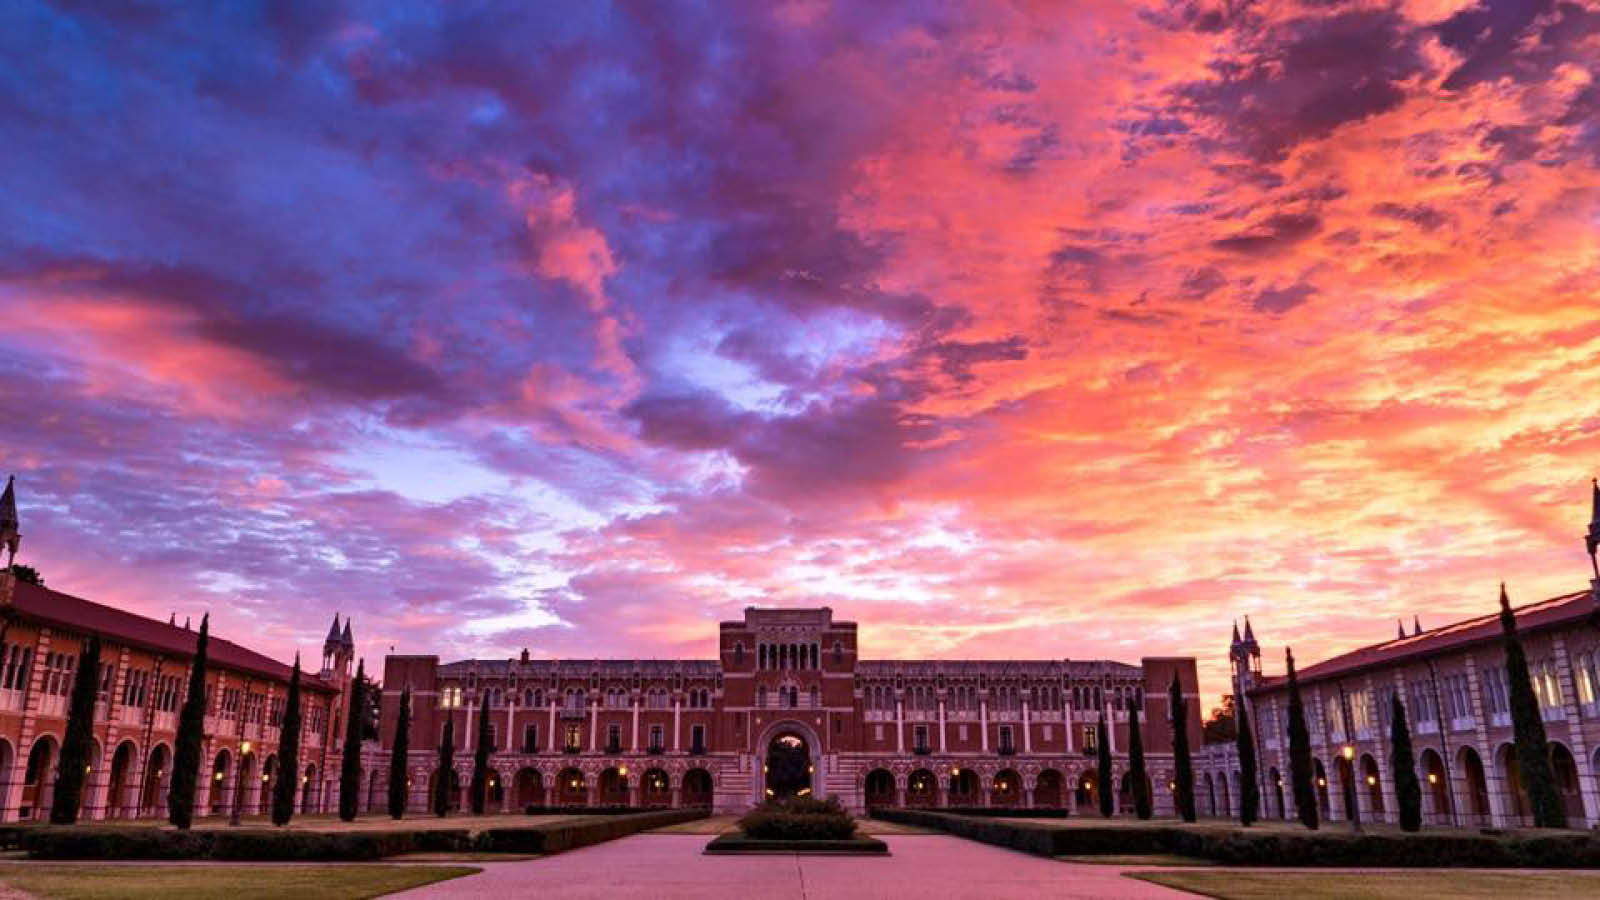 After a storm, the sky over Rice University glows purple, pink, yellow and orange.